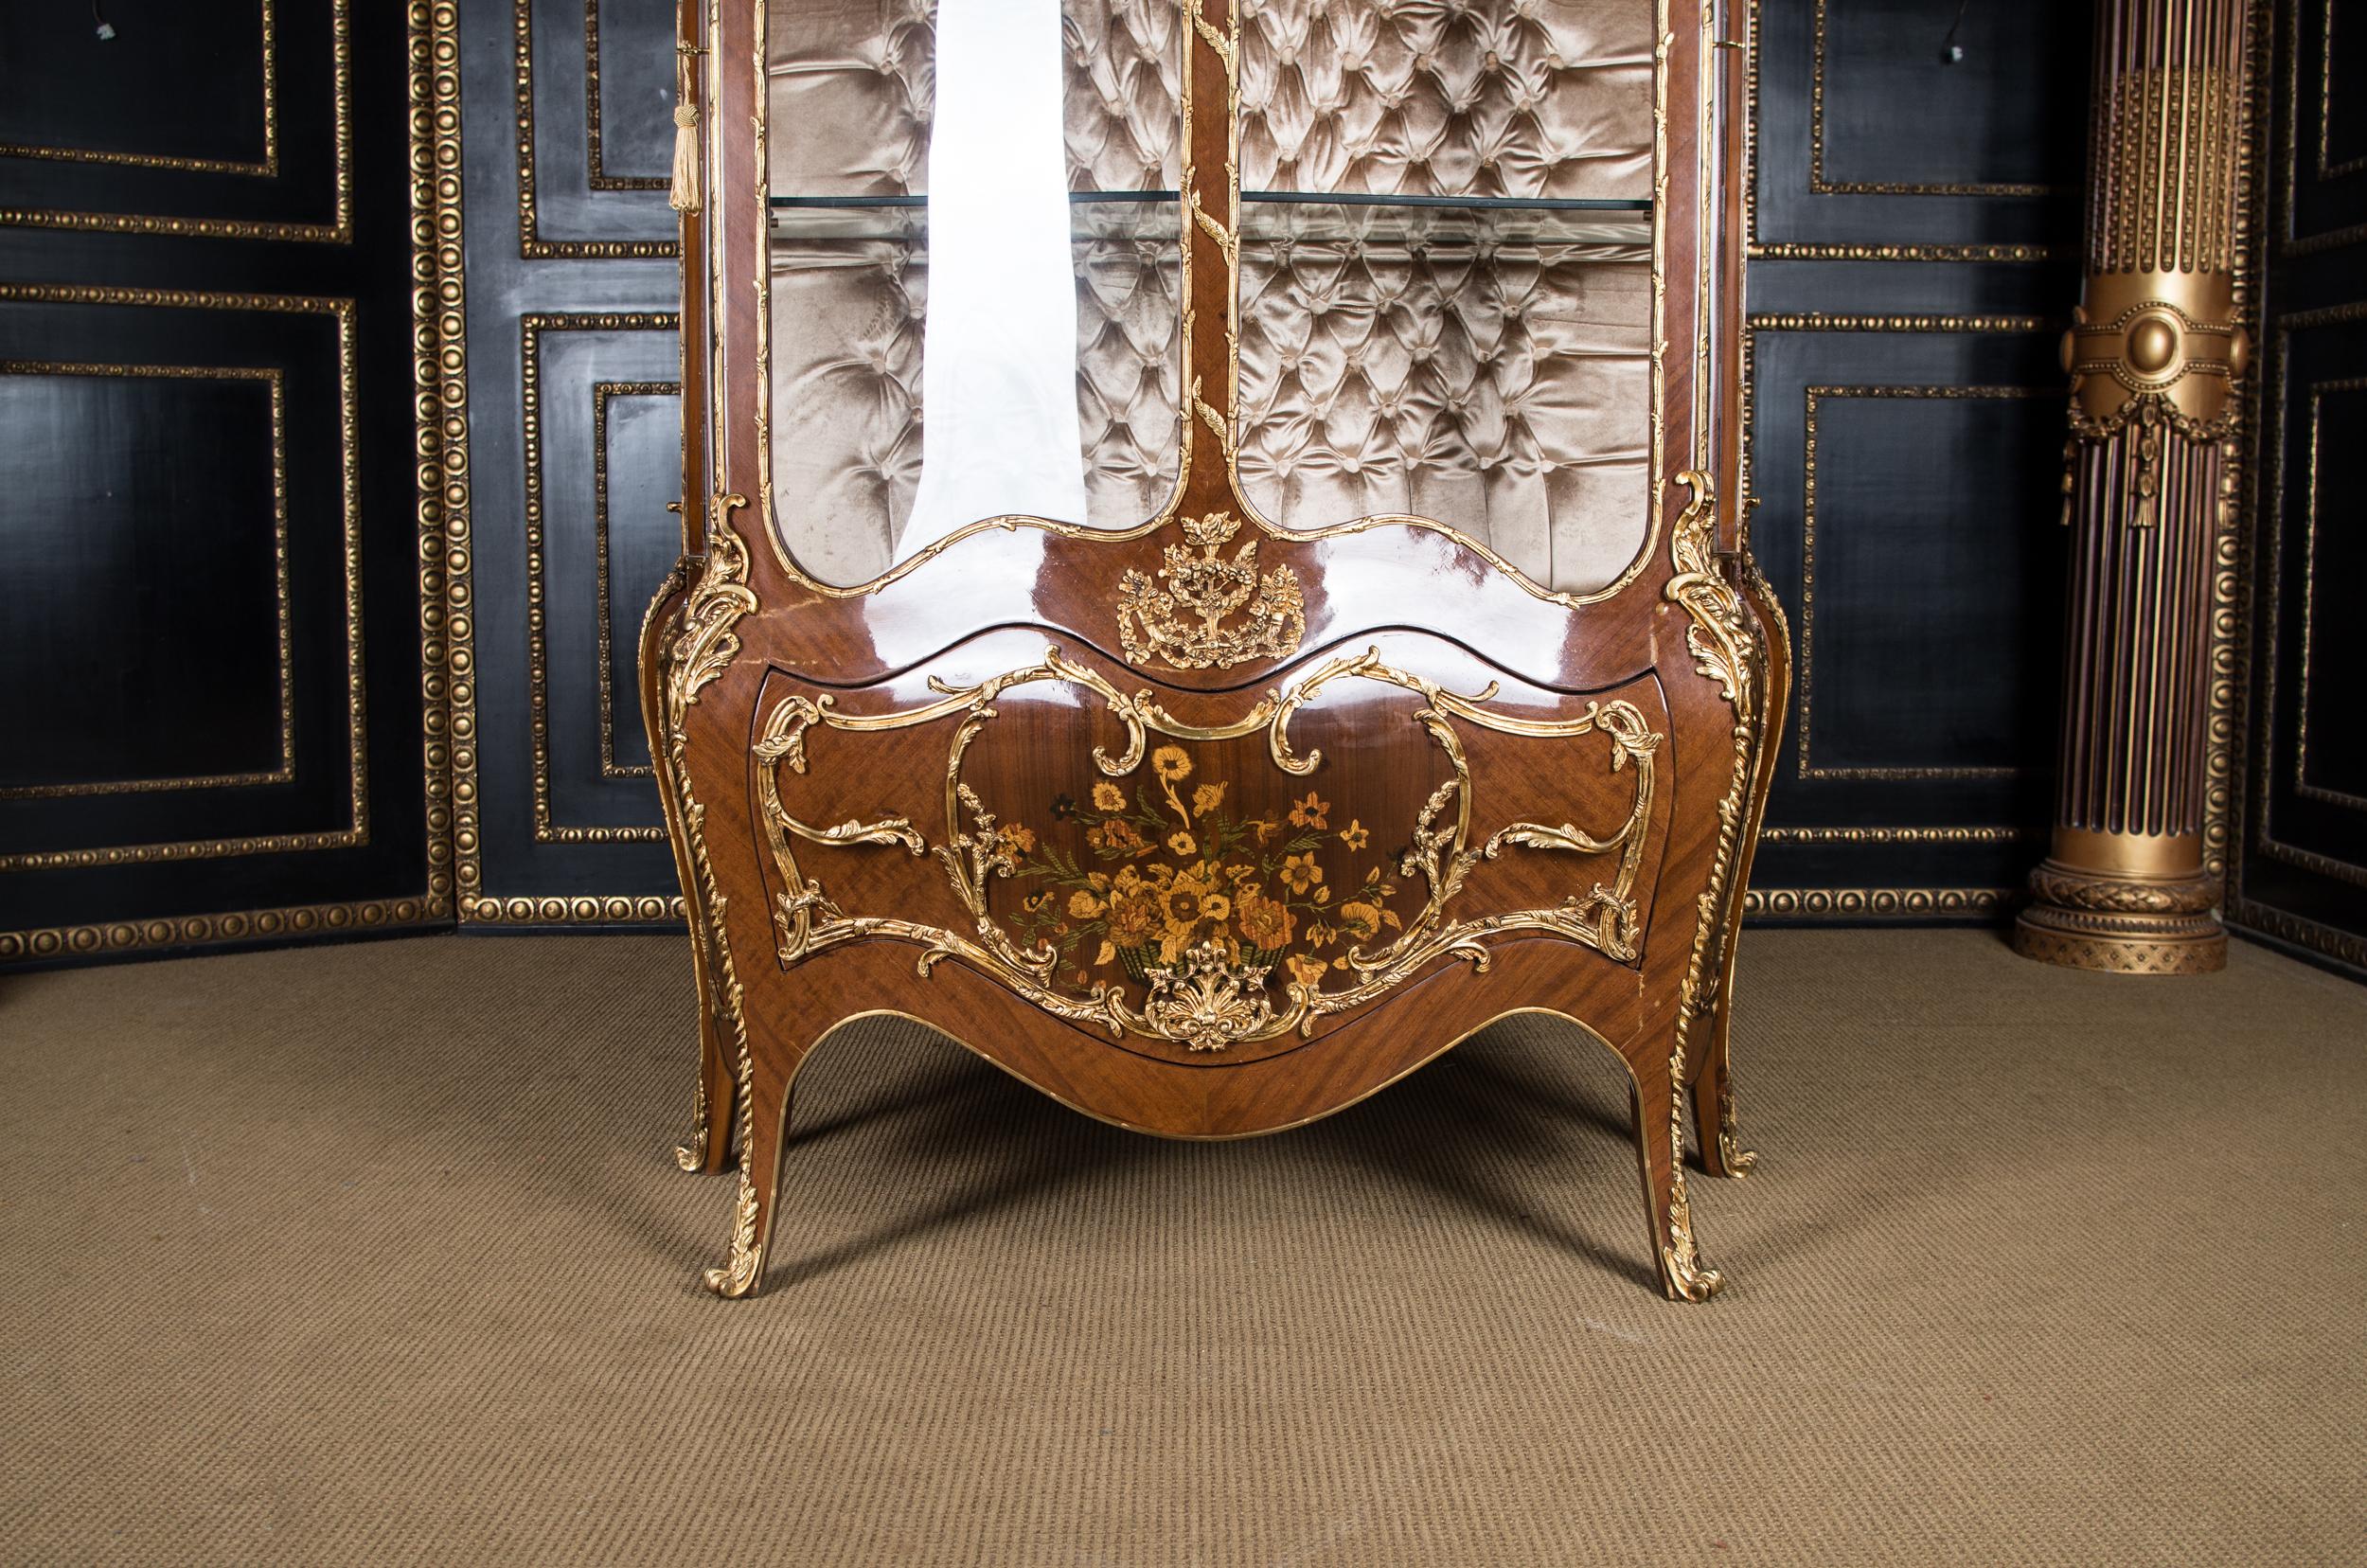 Majestic French Display Case in the Style of the 18th Century, Louis Quinze (Louis XV.)